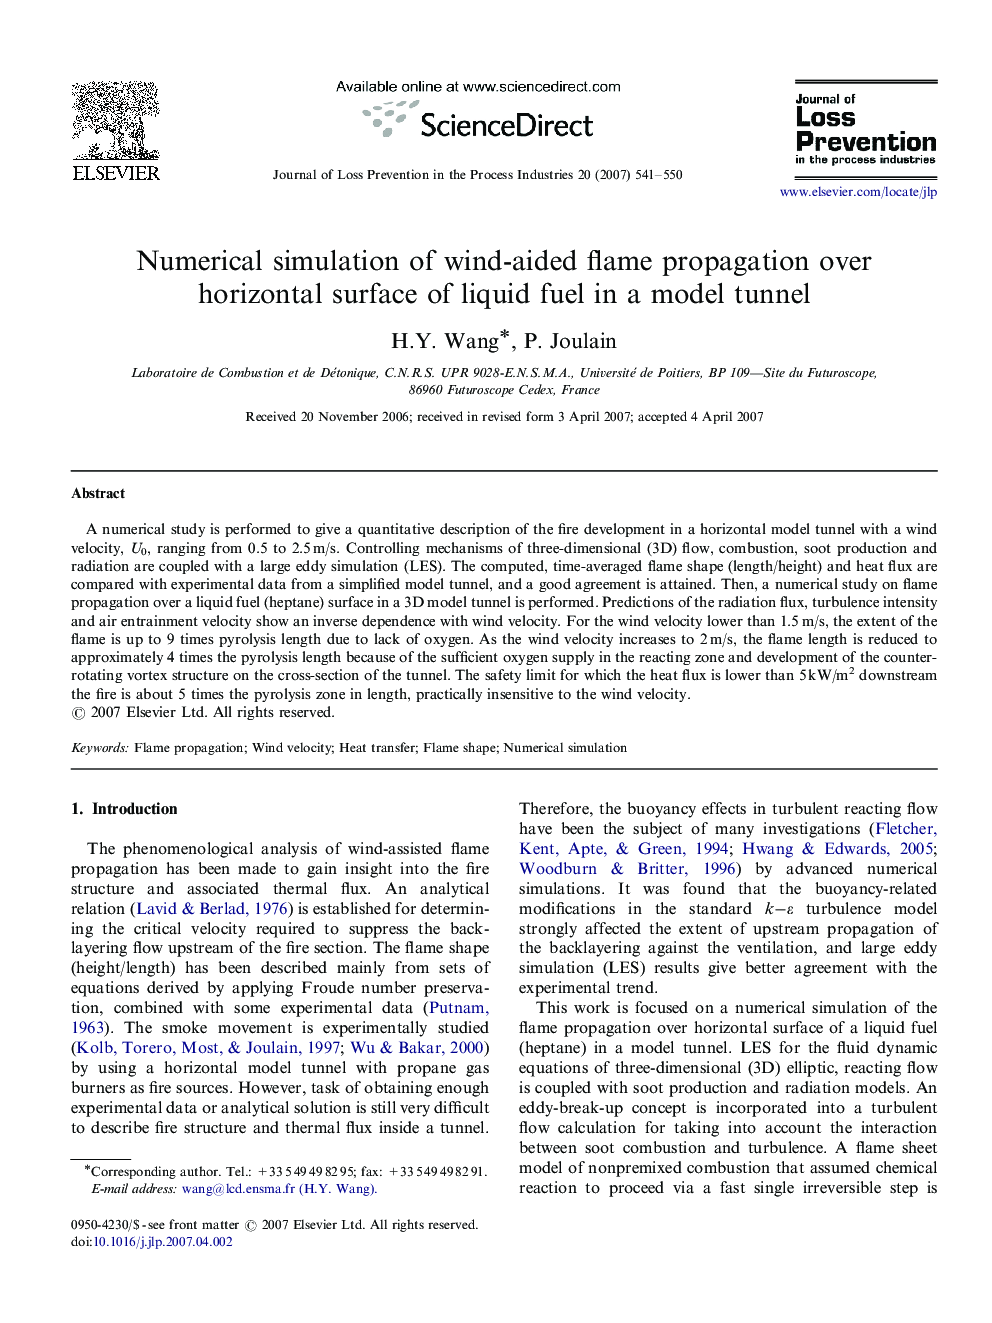 Numerical simulation of wind-aided flame propagation over horizontal surface of liquid fuel in a model tunnel